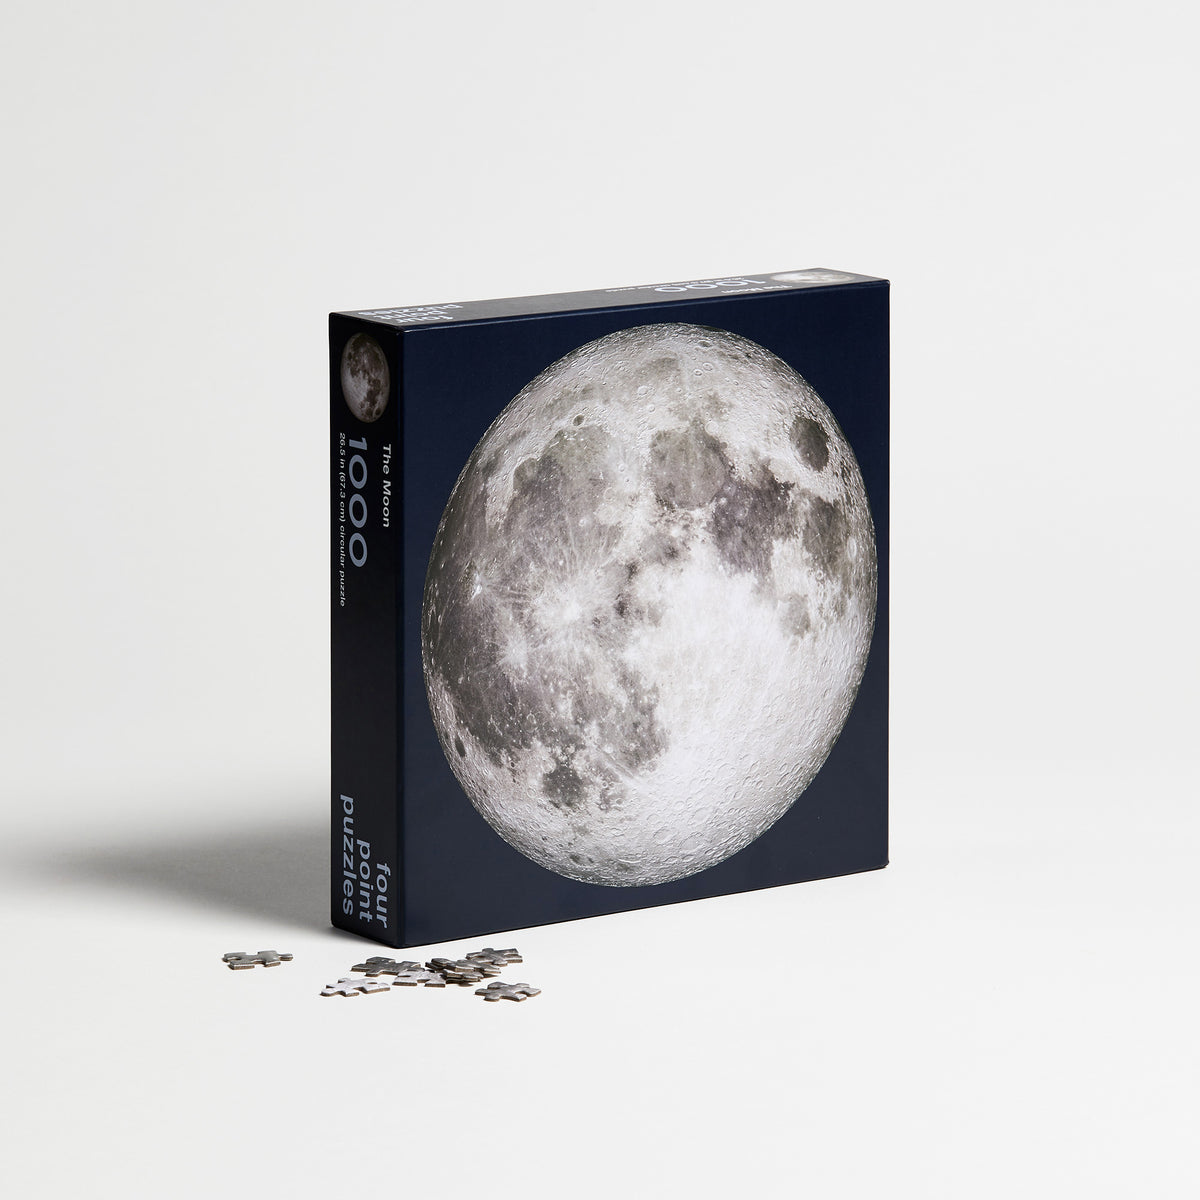 The Moon 1000 Stück Puzzel Spiel Puzzlespiel Earth Planets Maps Puzzle A9V0 